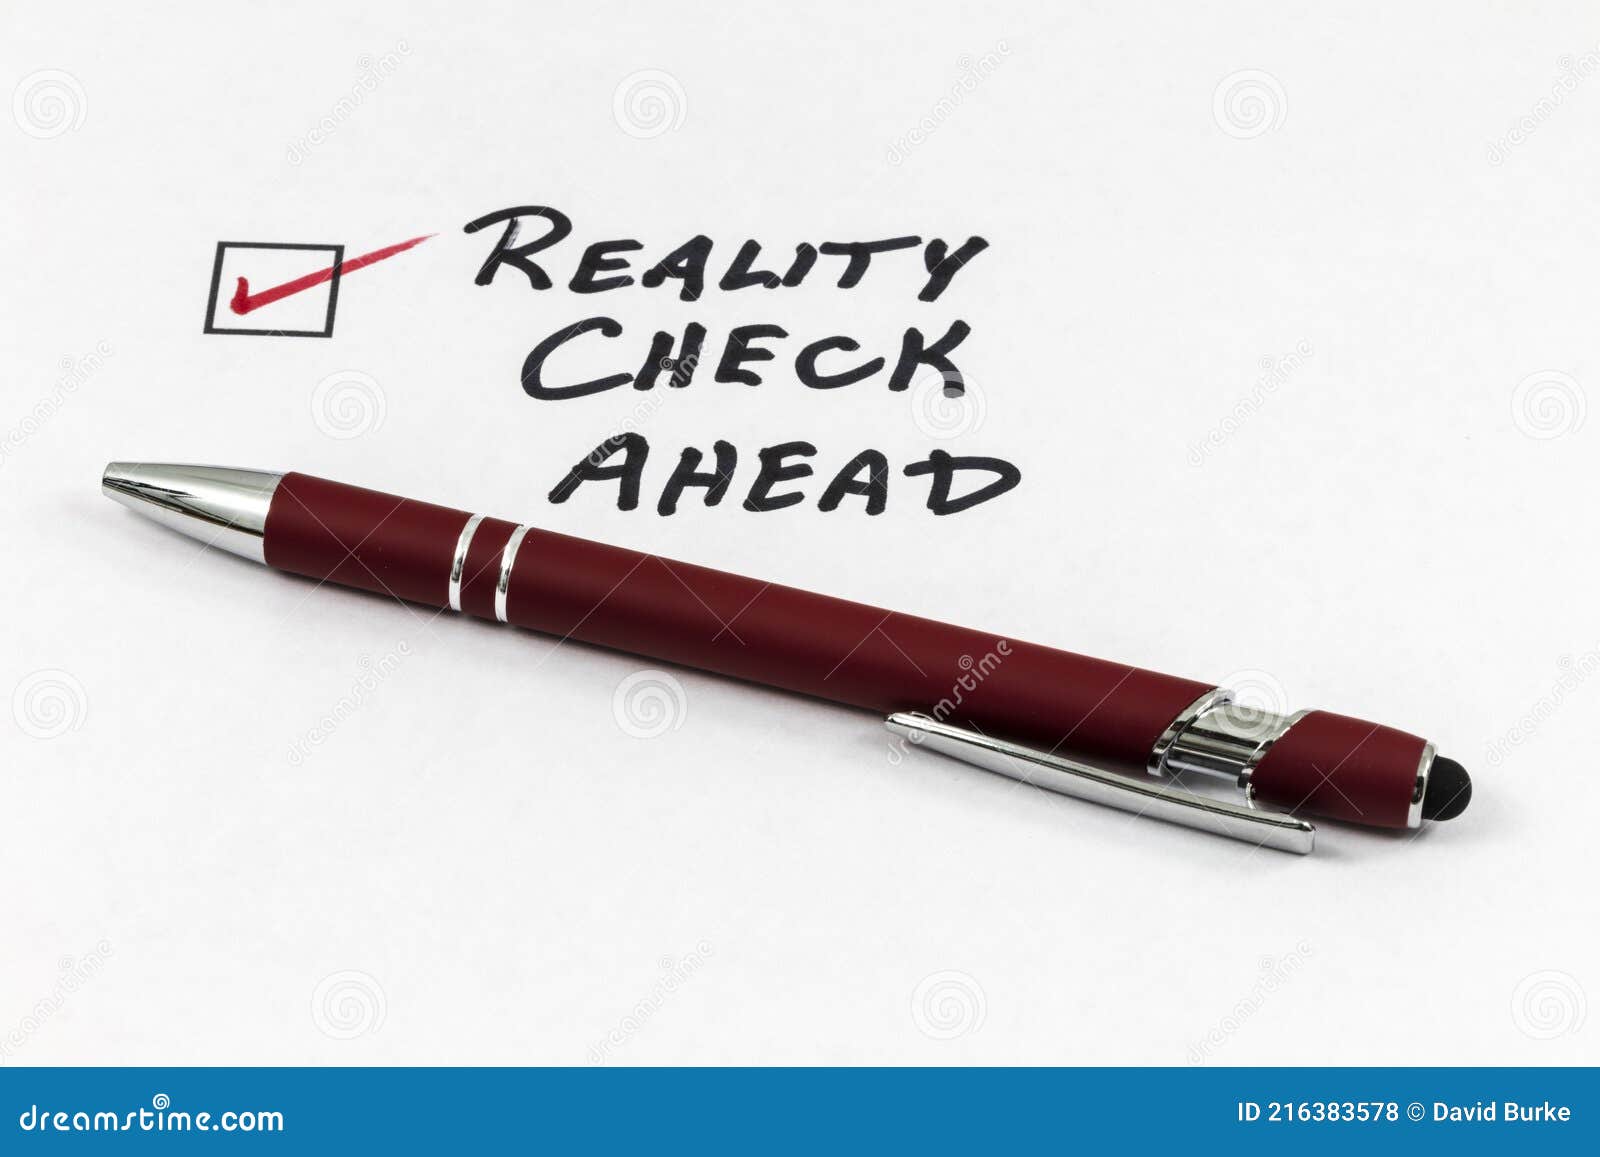 reality check ahead truth practice actuality perspective real life